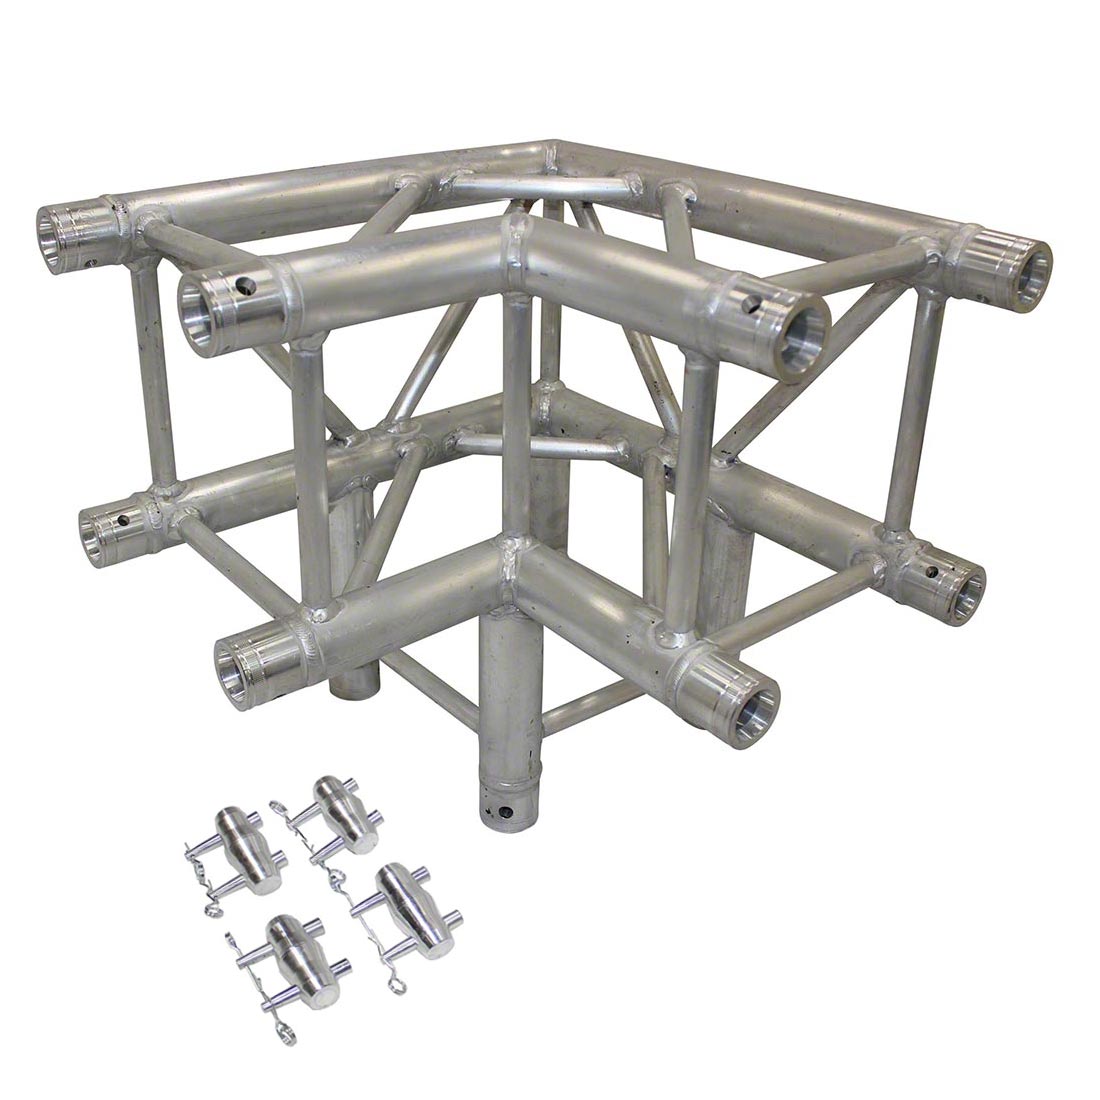 F34 Square Truss Corners, Junctions & Baseplates